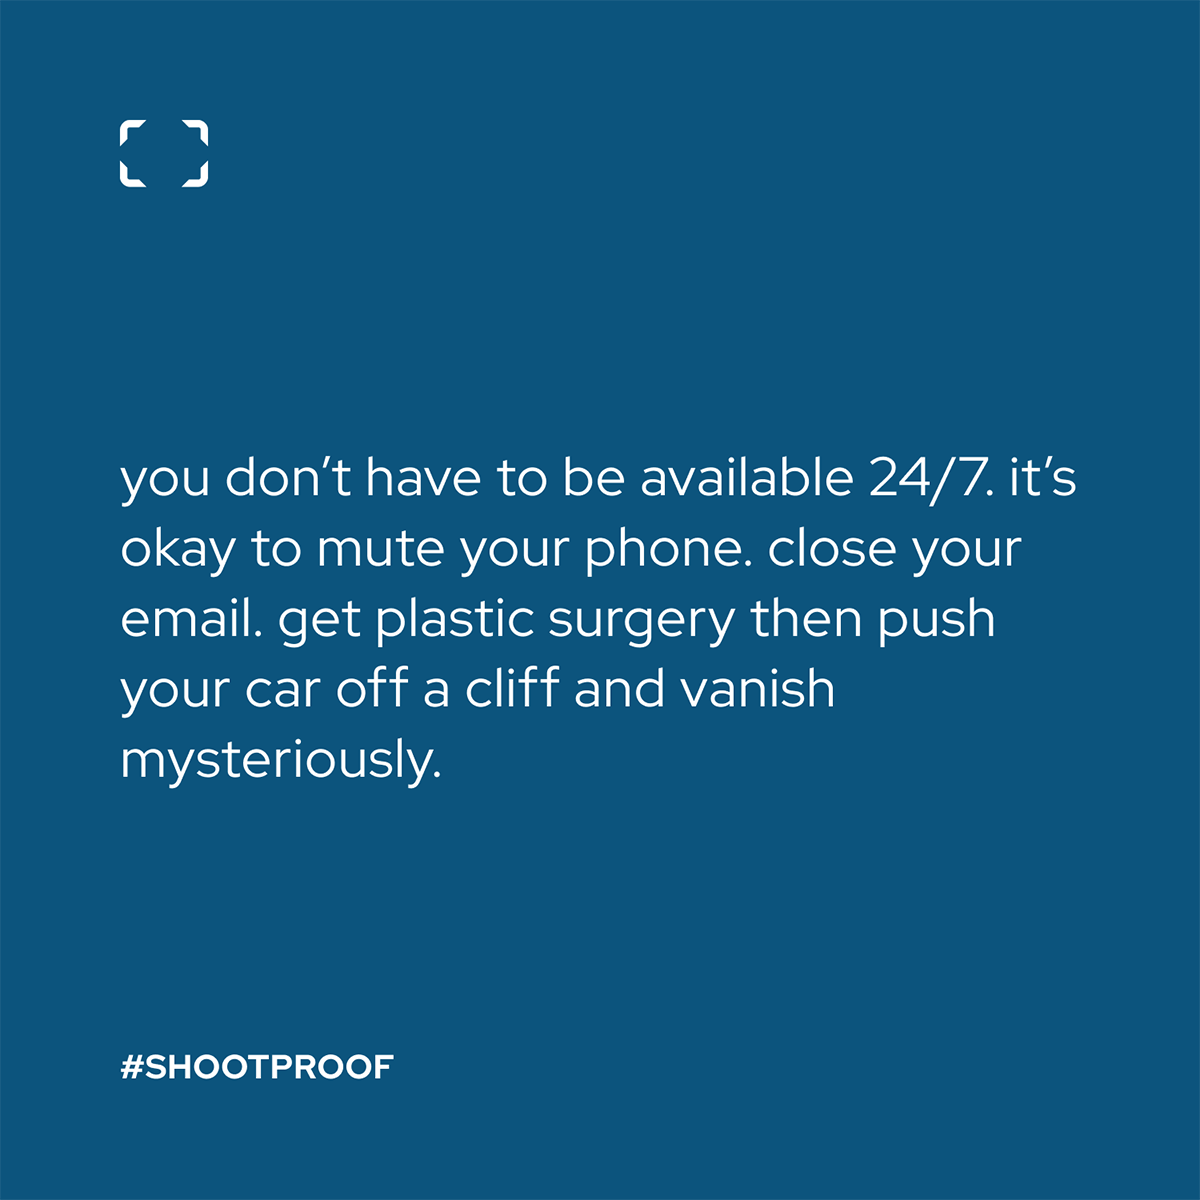 A ShootProof Instagram meme written by Anne Simone. It says, "You don't have to be available 24/7. It's okay to mute your phone, close your email, get plastic surgery then push your car off a cliff an vanish mysteriously."